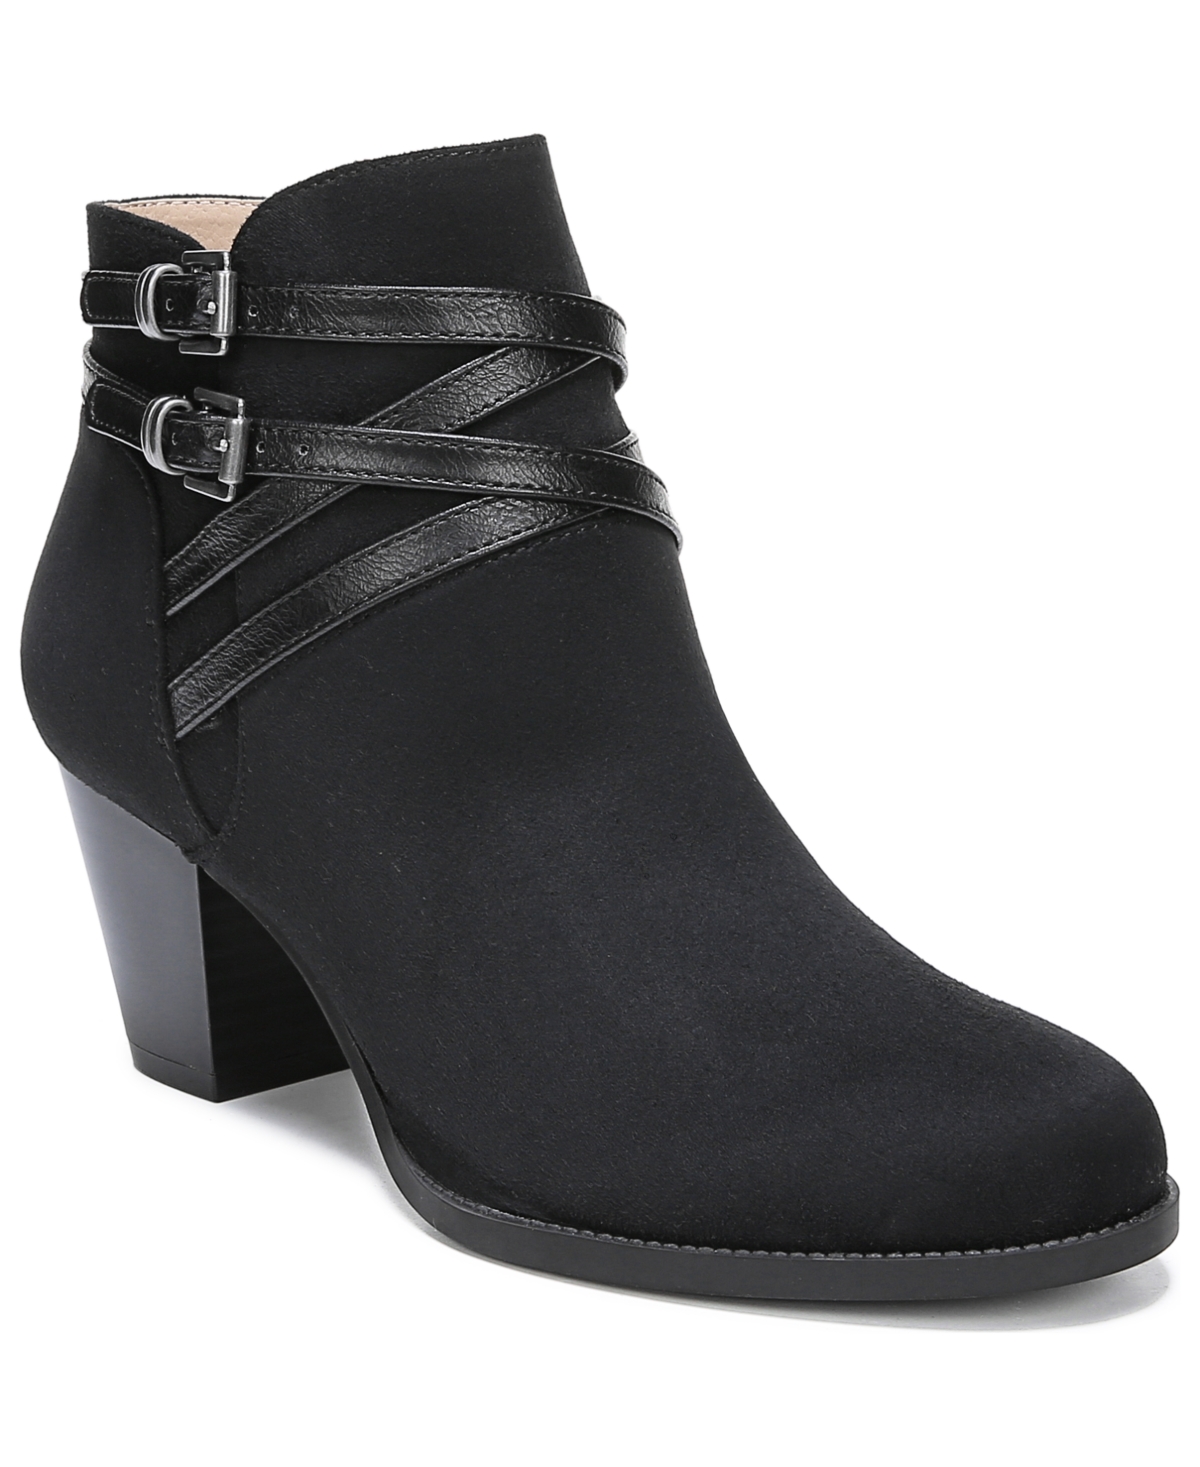 Women's Jezebel Ankle Booties - Black Fabric/Faux Leather